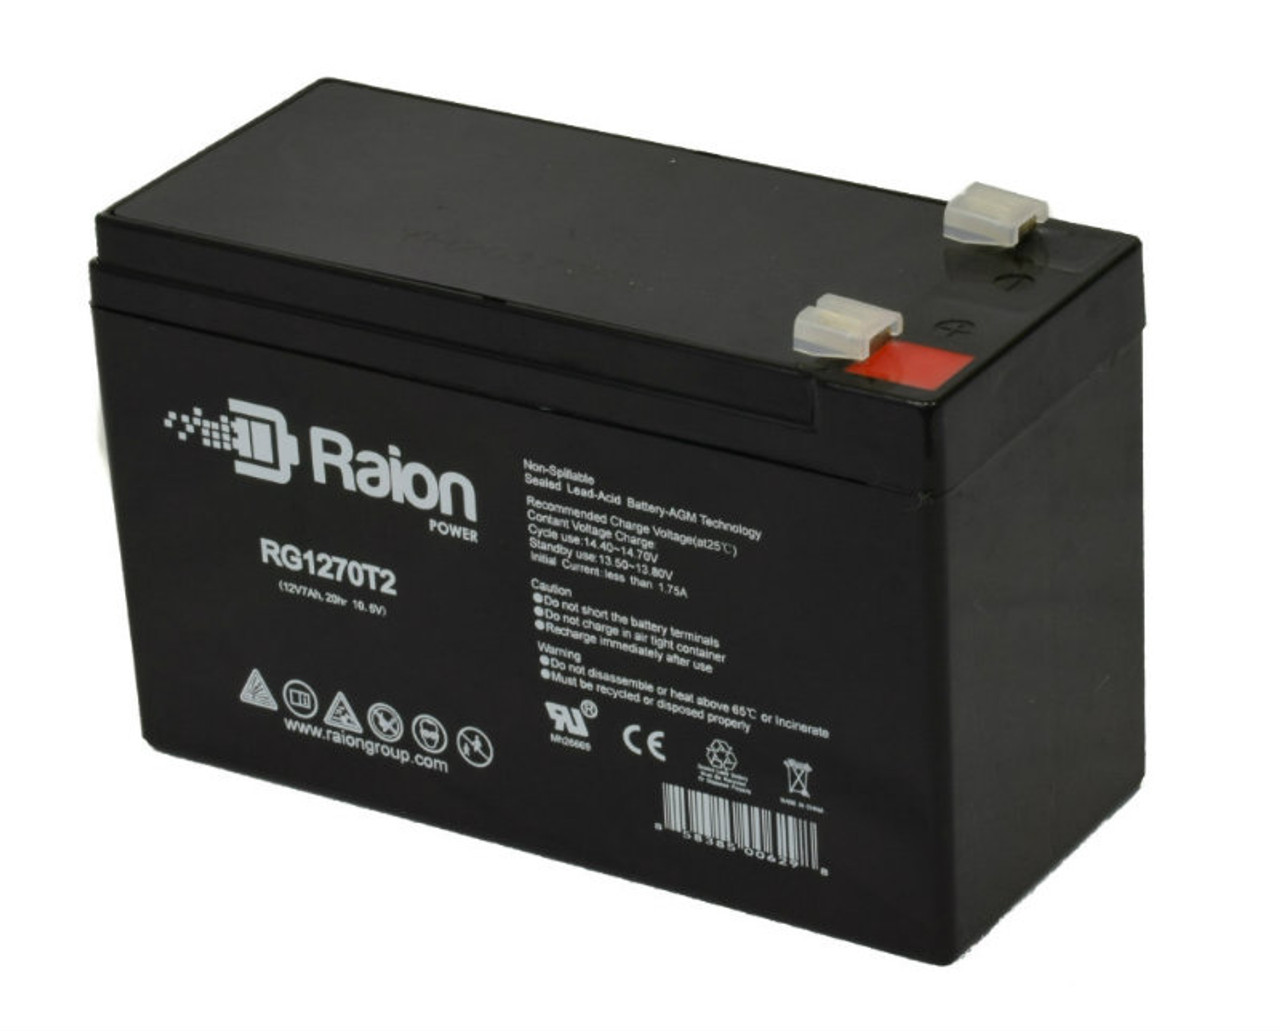 Raion Power RG1270T2 12V 7Ah Rechargeable Battery for Ultra Products 1000 VA AVR Lawn Mower